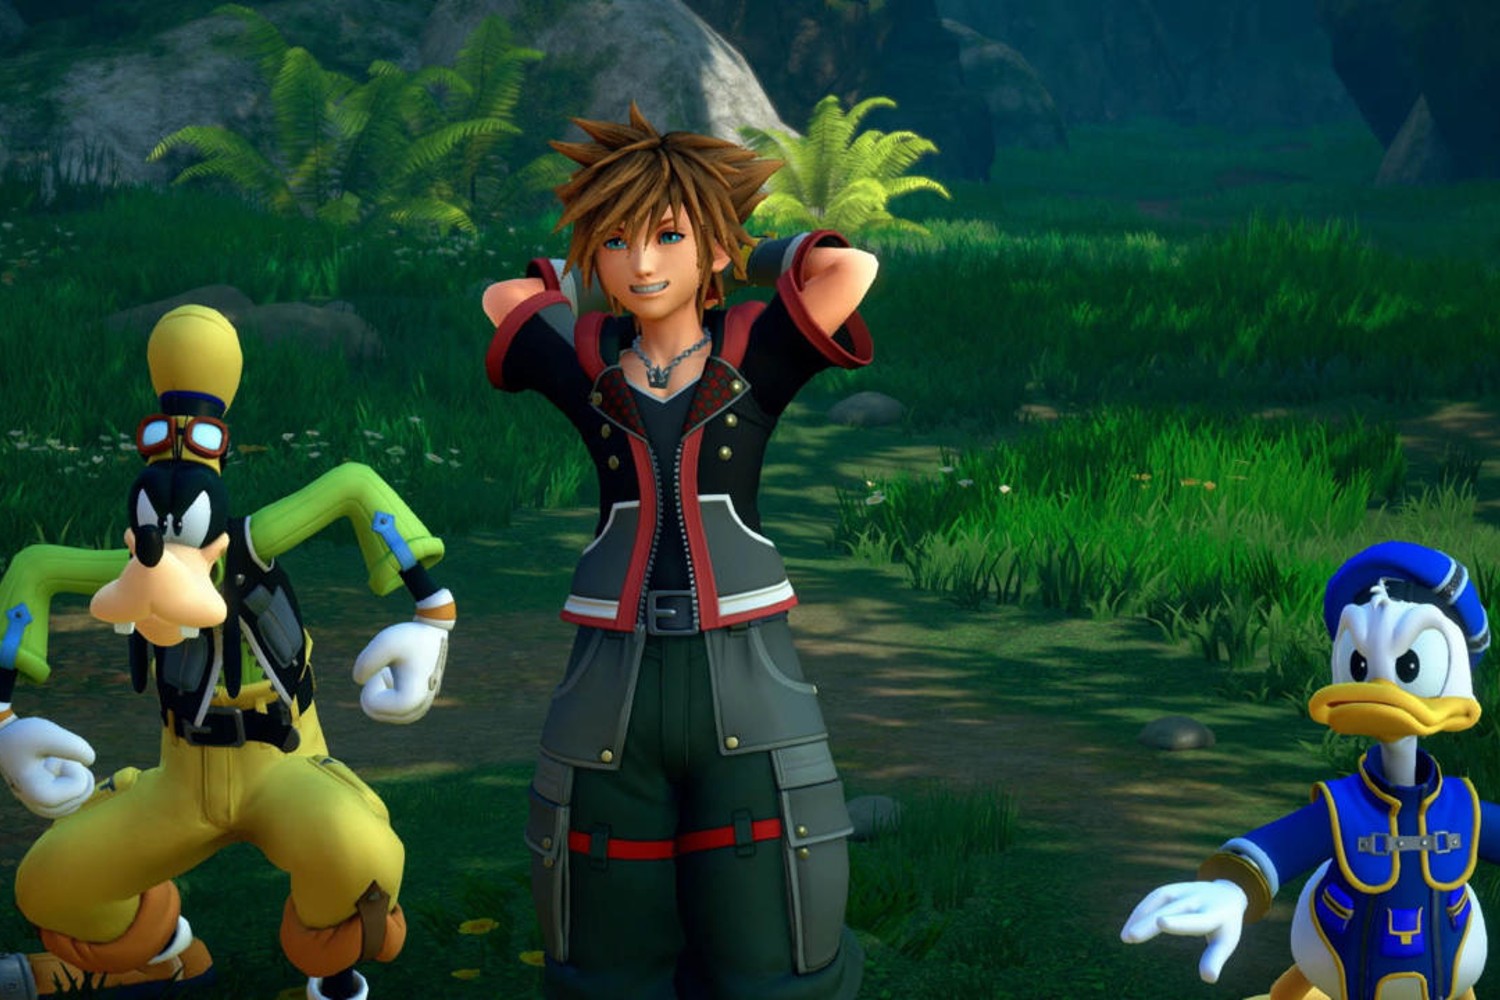 Kingdom Hearts 3 is the best-selling console game in the series